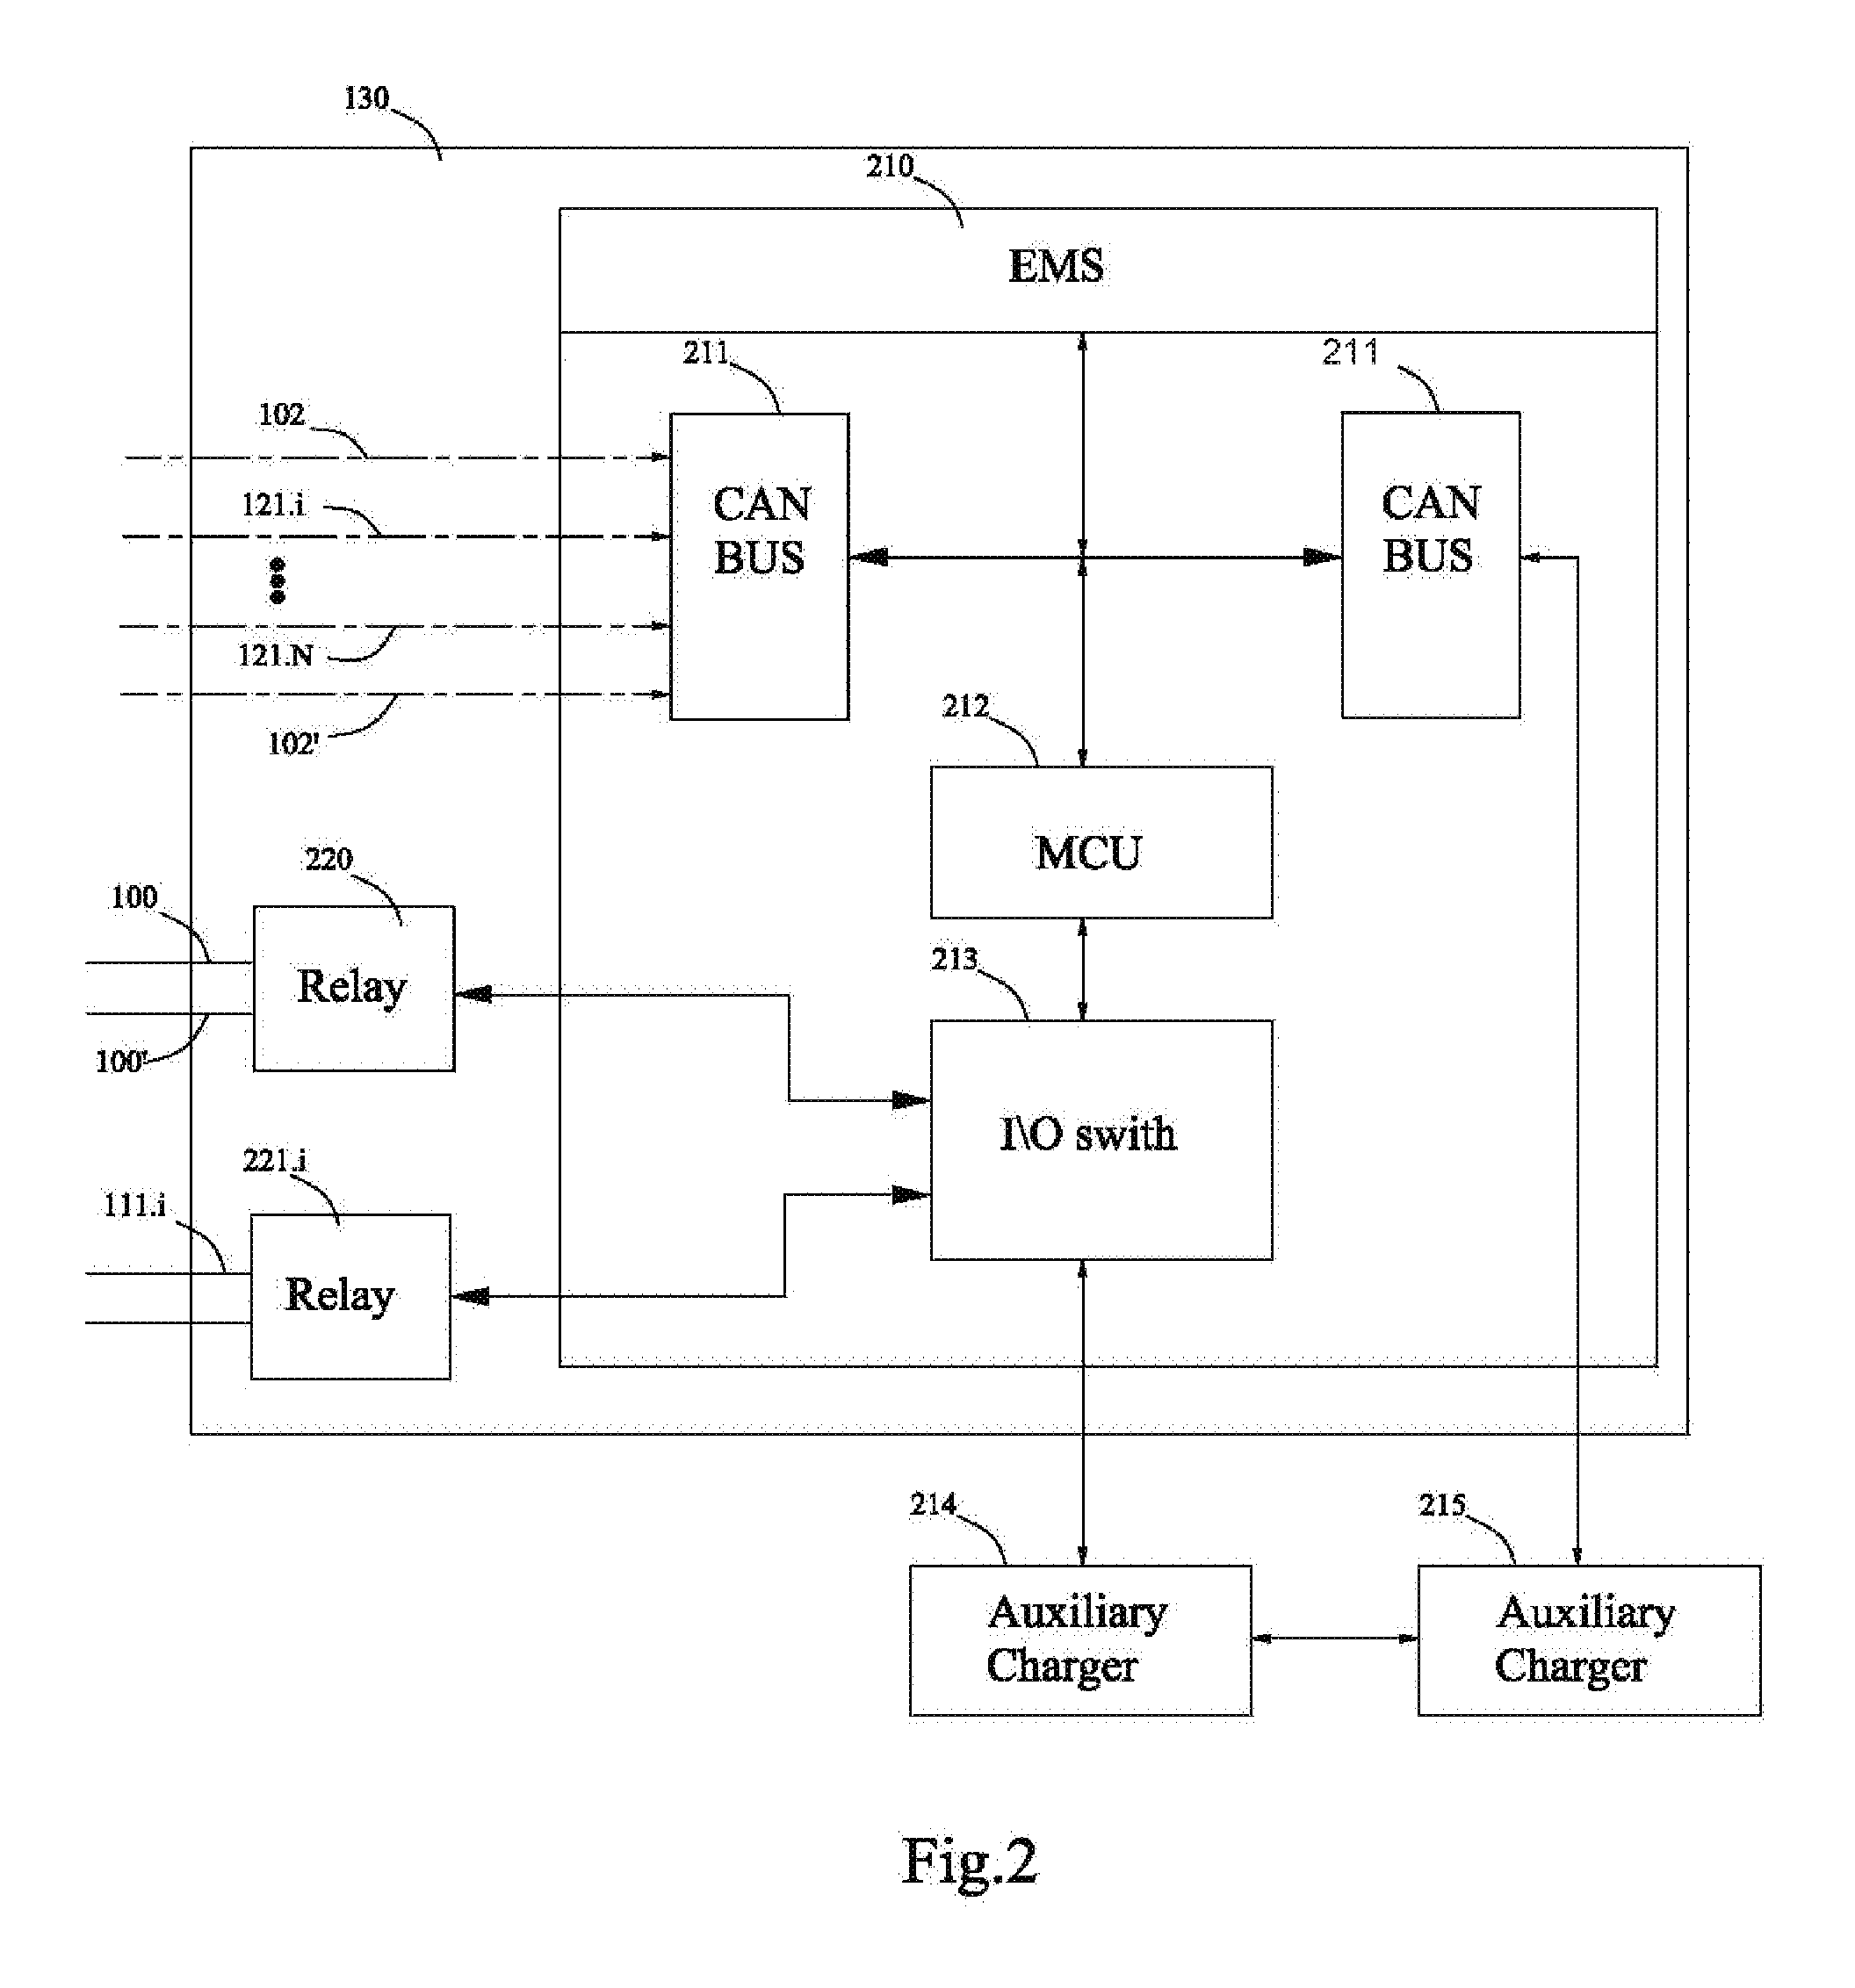 Battery pack, battery charging station, and charging method